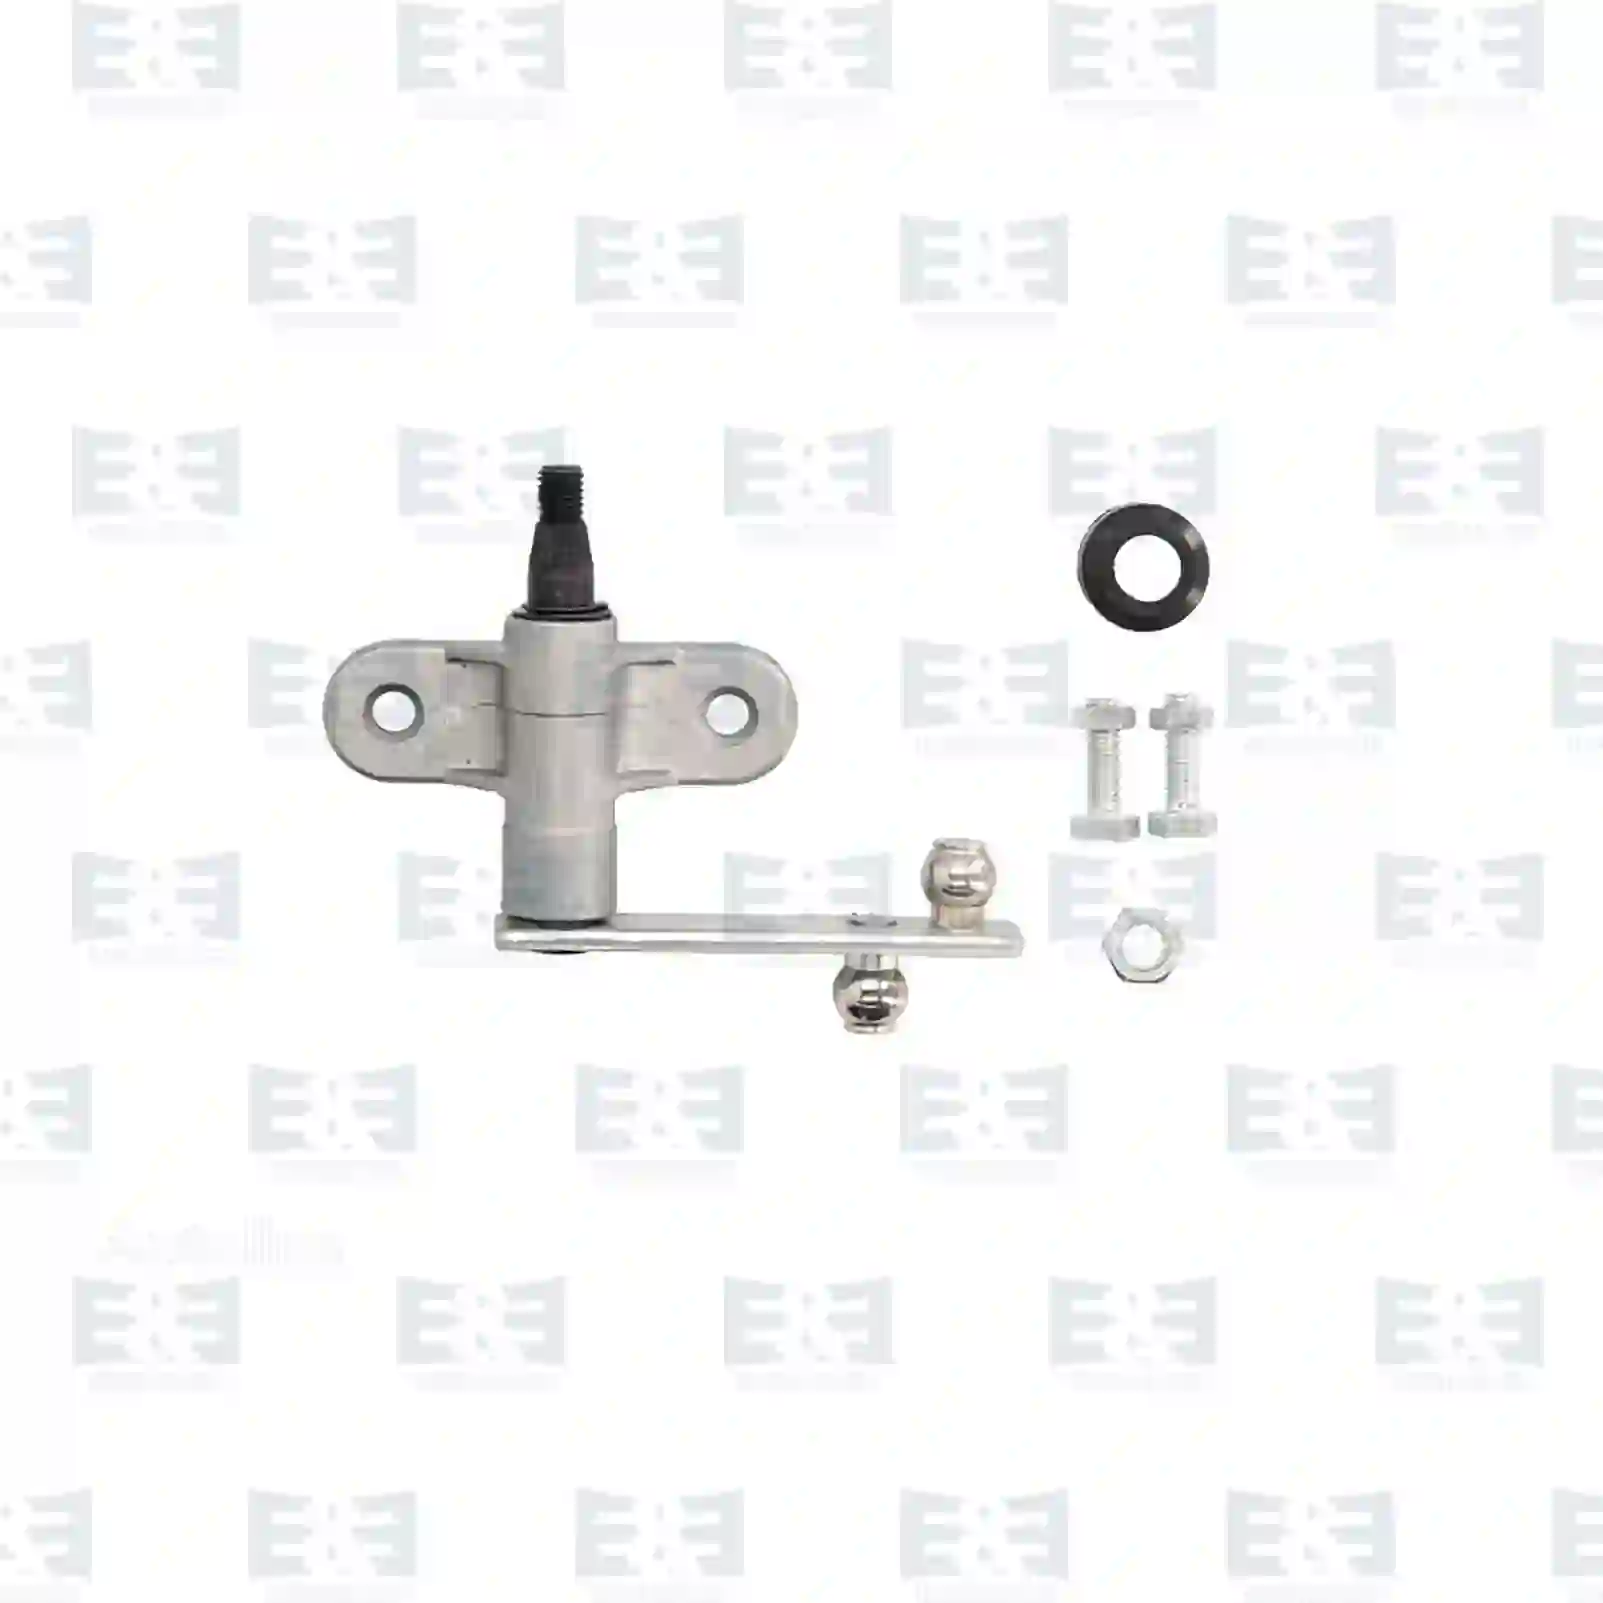  Wiper arm bearing || E&E Truck Spare Parts | Truck Spare Parts, Auotomotive Spare Parts